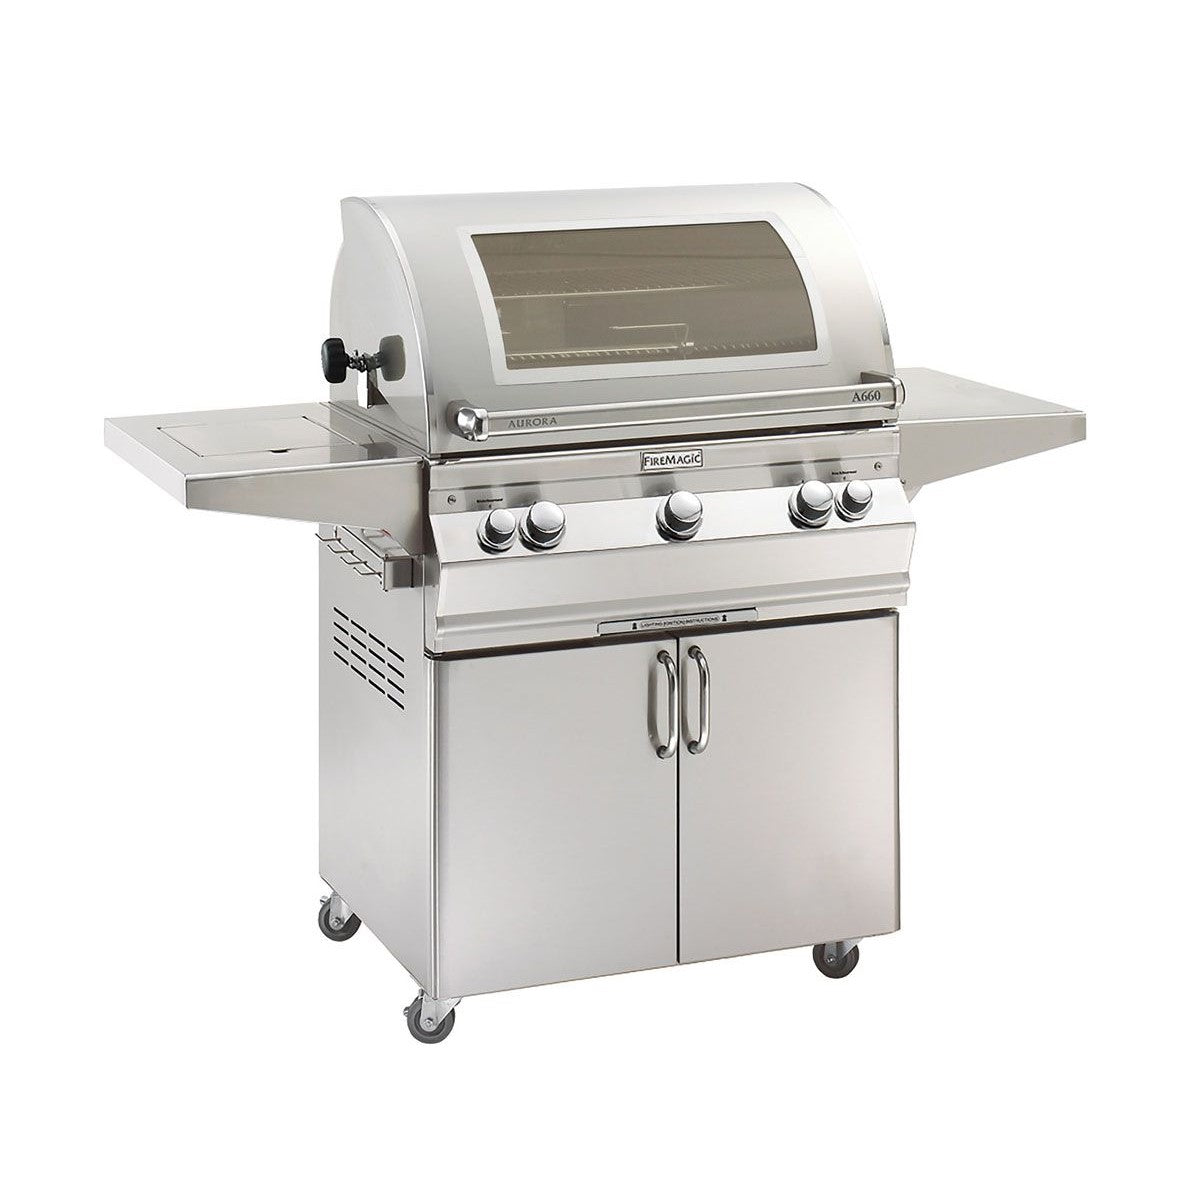 Fire Magic Aurora 30" Portable Grills with Analog Thermometer & Single Side Burner A660s